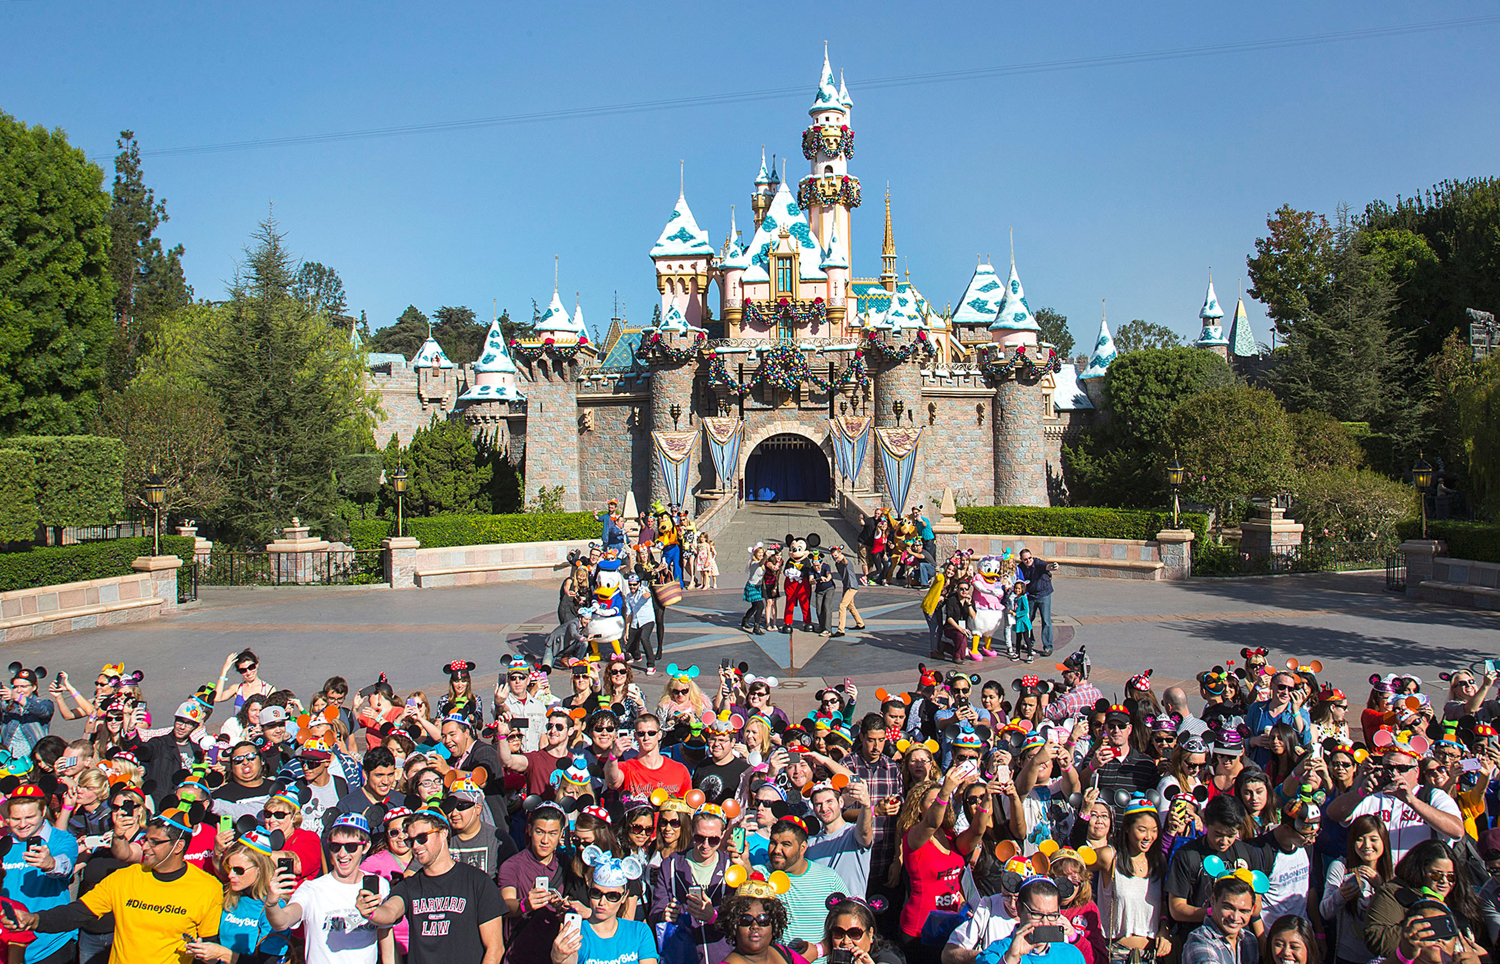 More than 1,000 fans gather for a photo at Disneyland in Anaheim, Calif. (Newsire — AP)